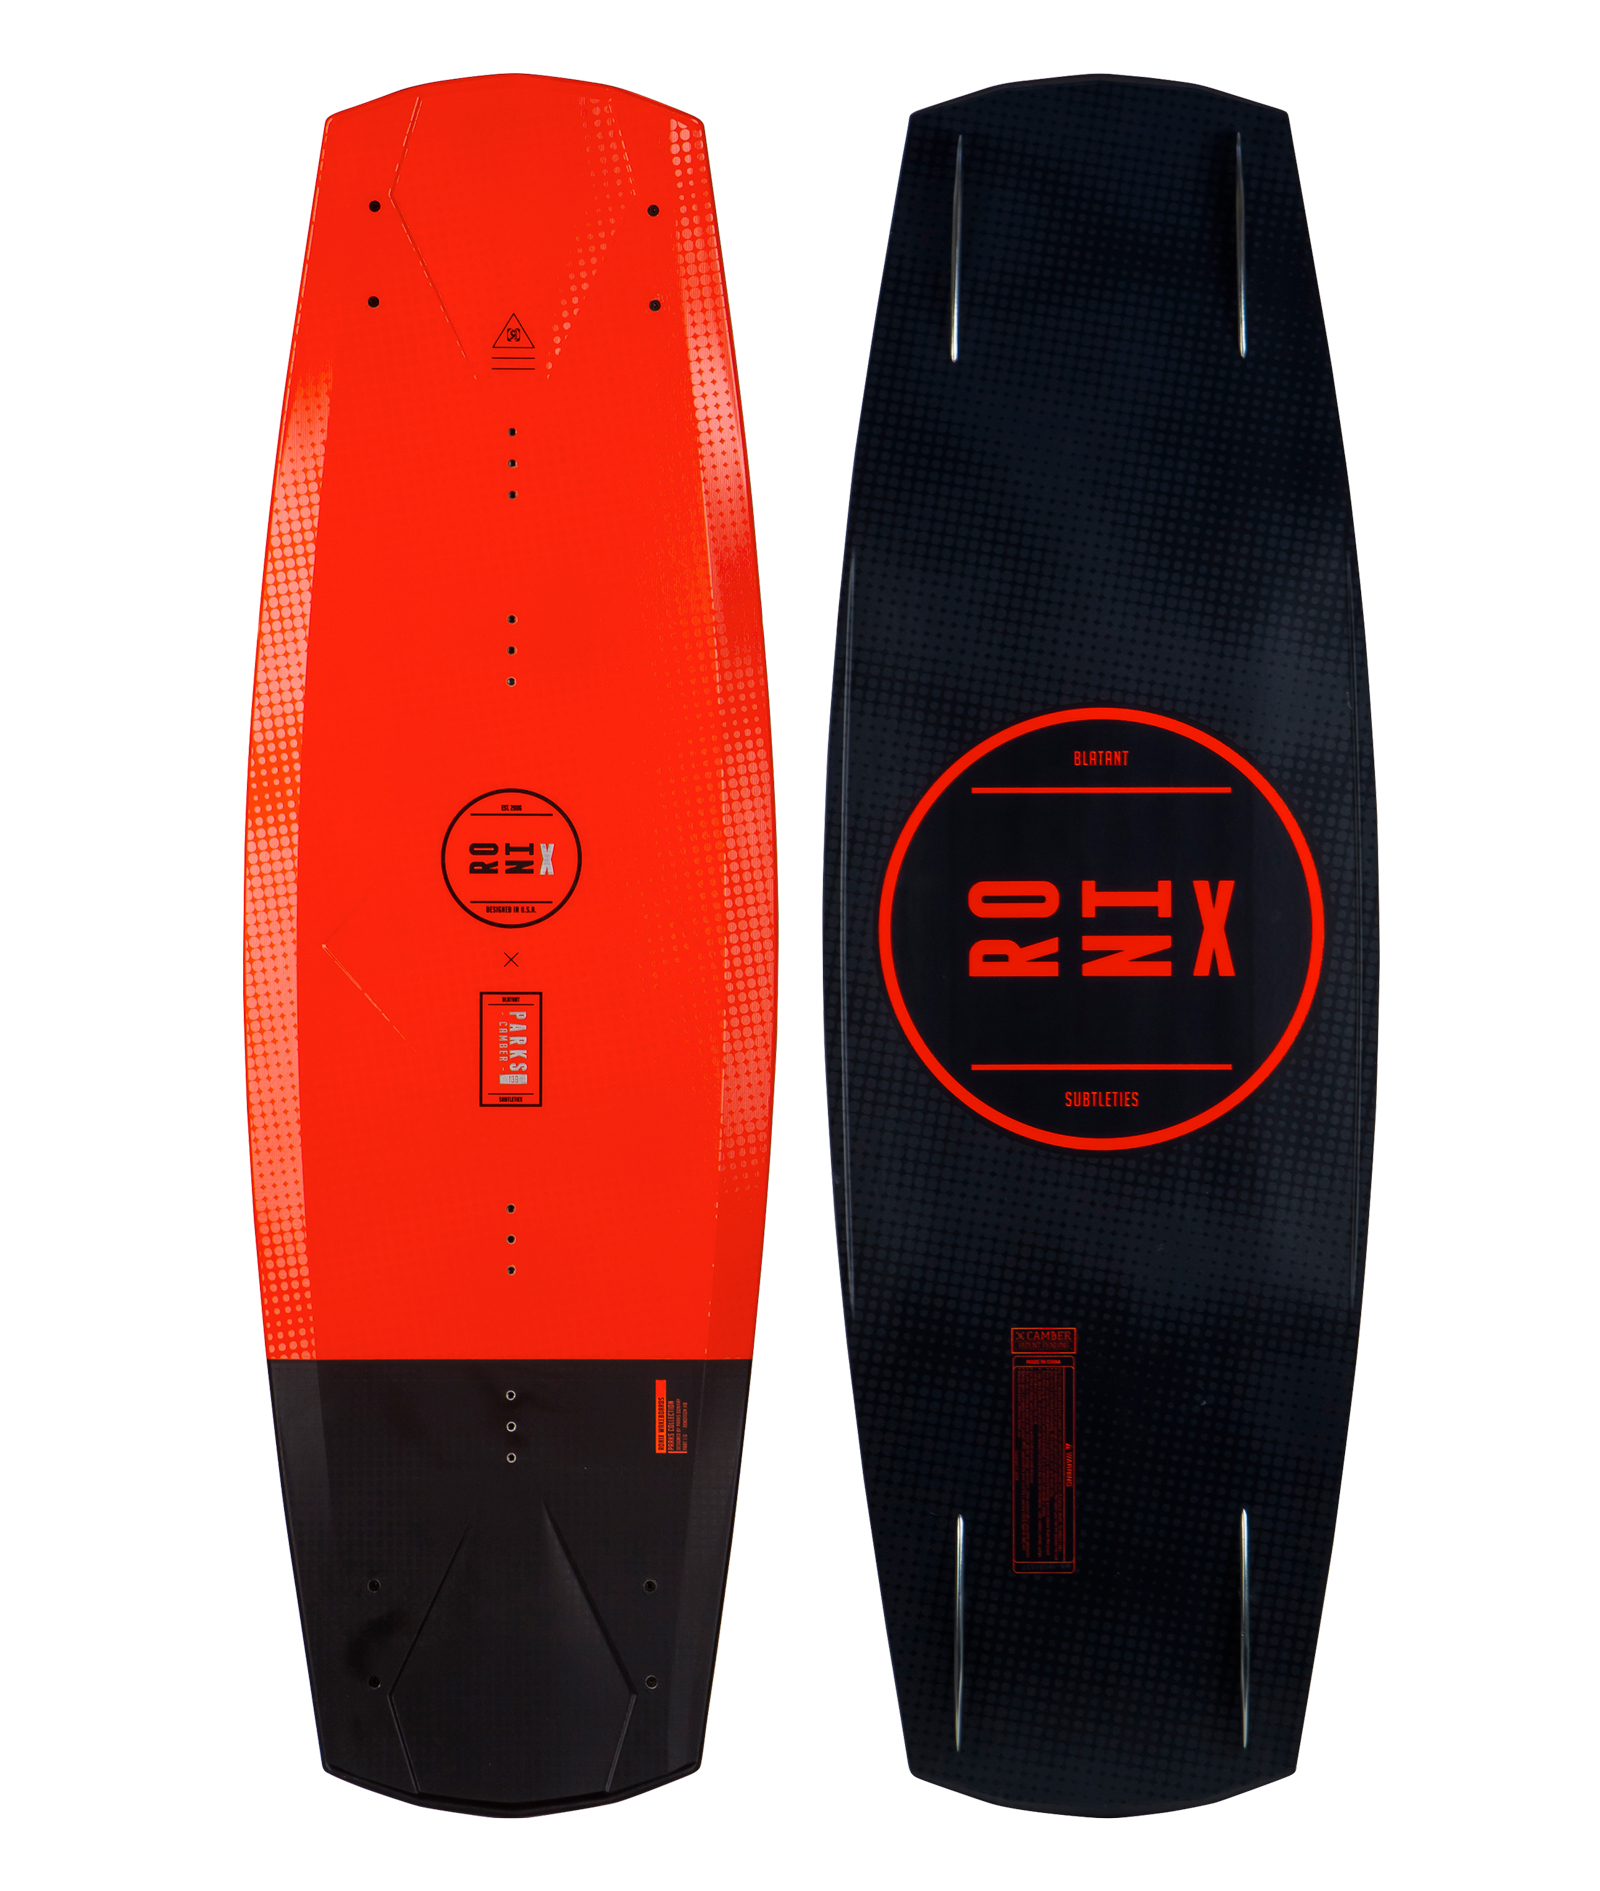   PARKS MODELLO EDITION WAKEBOARD RONIX 2017